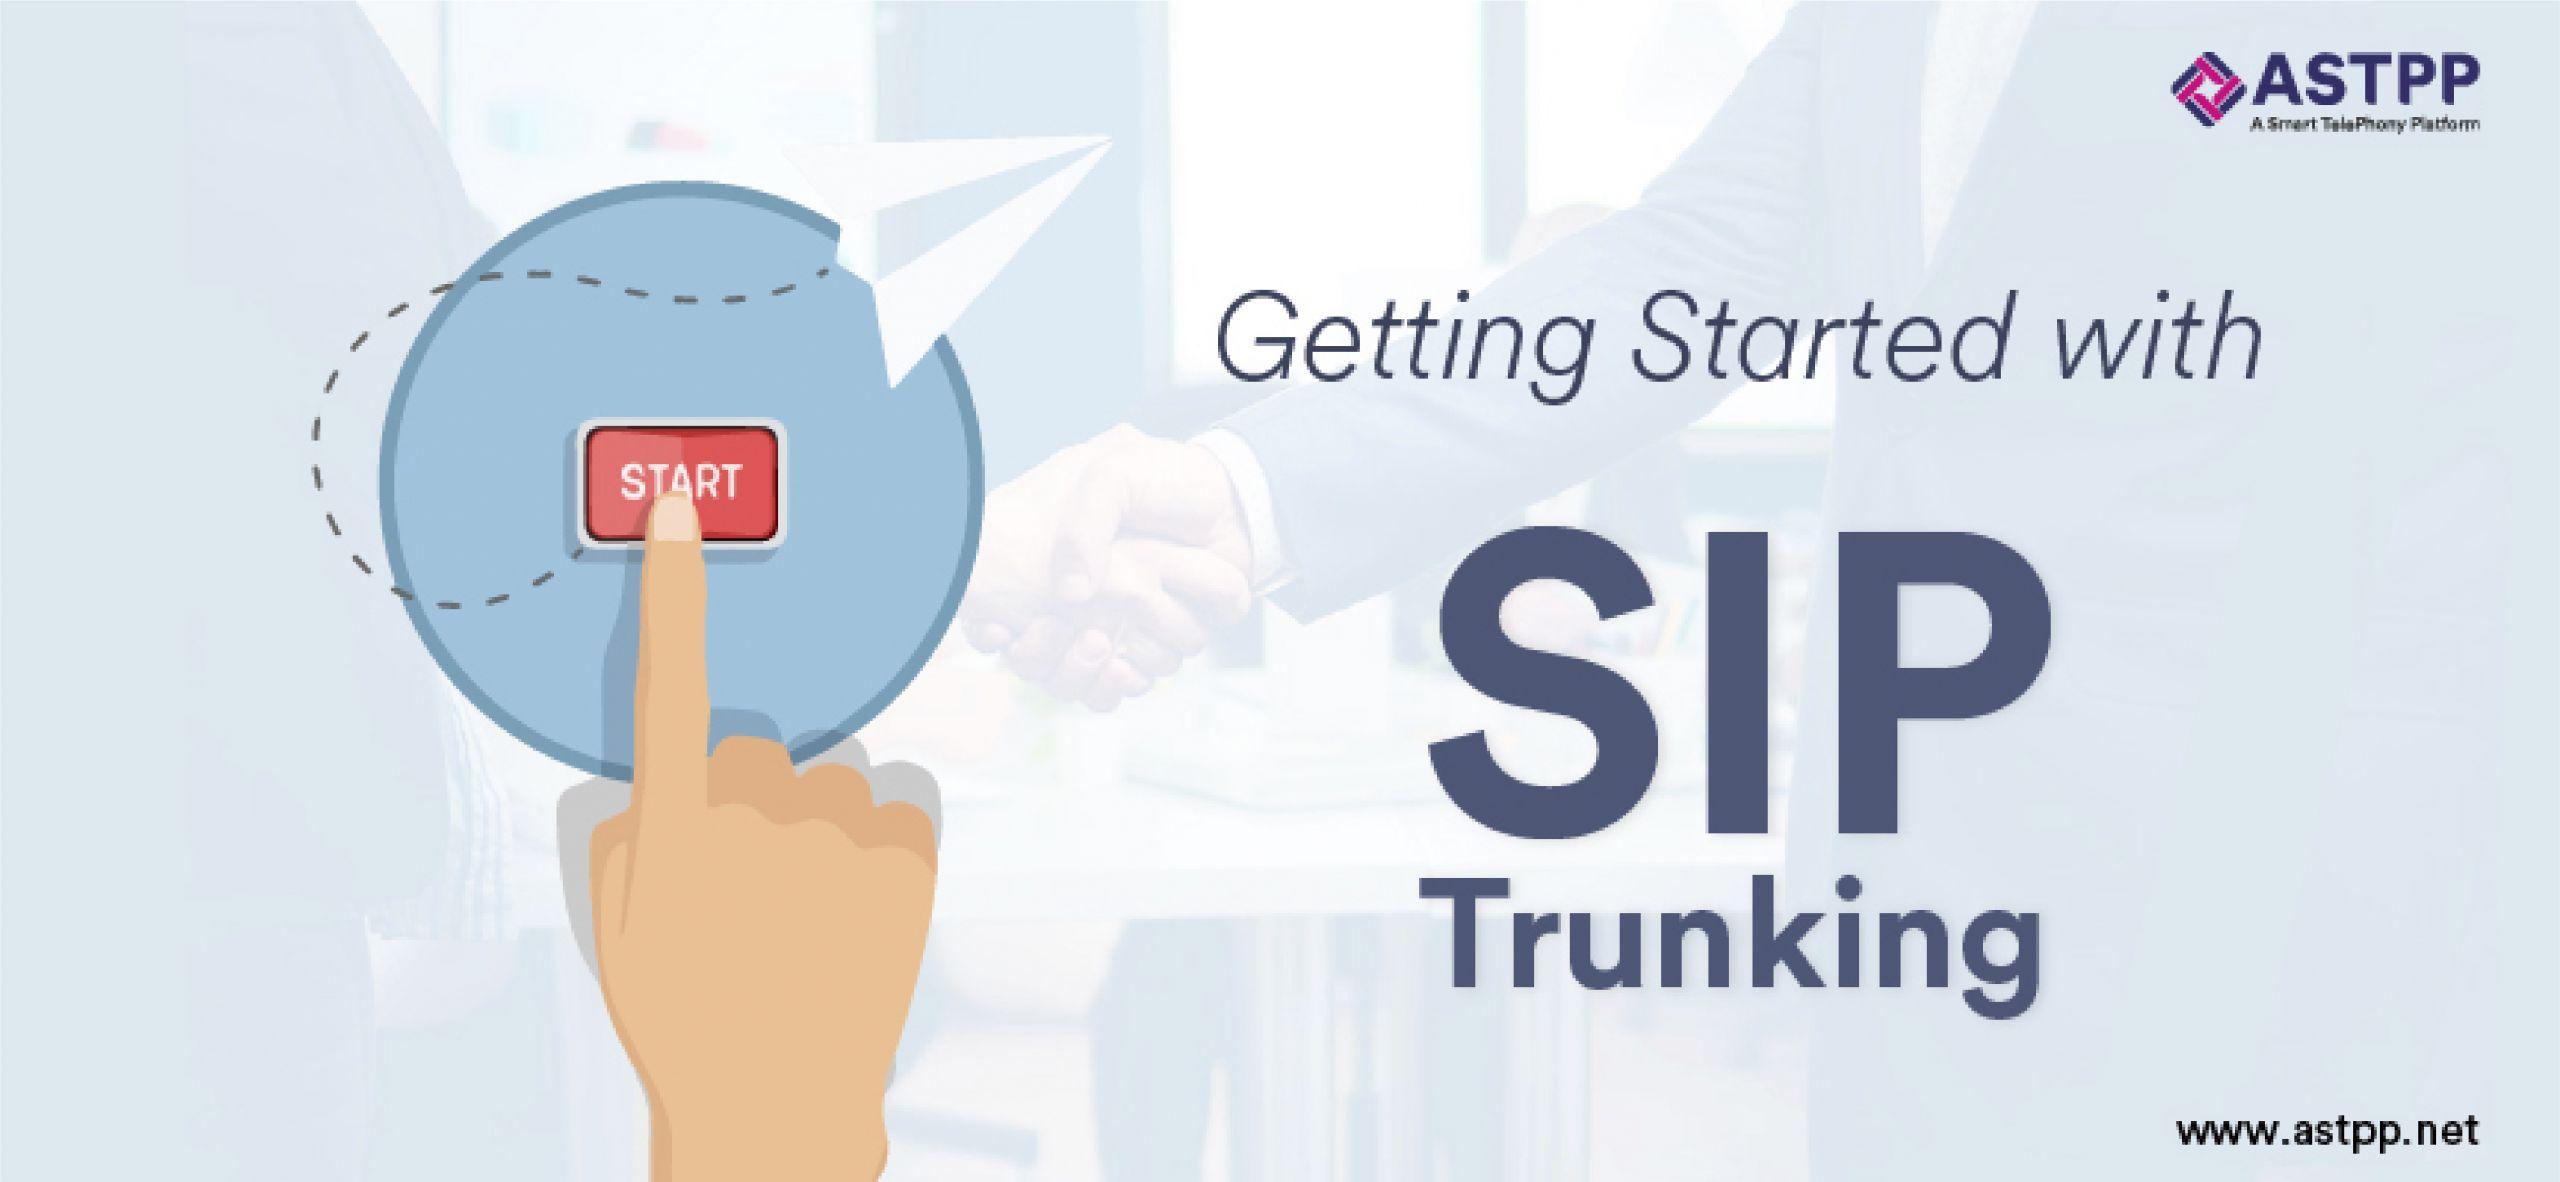 Getting Started with SIP Trunking